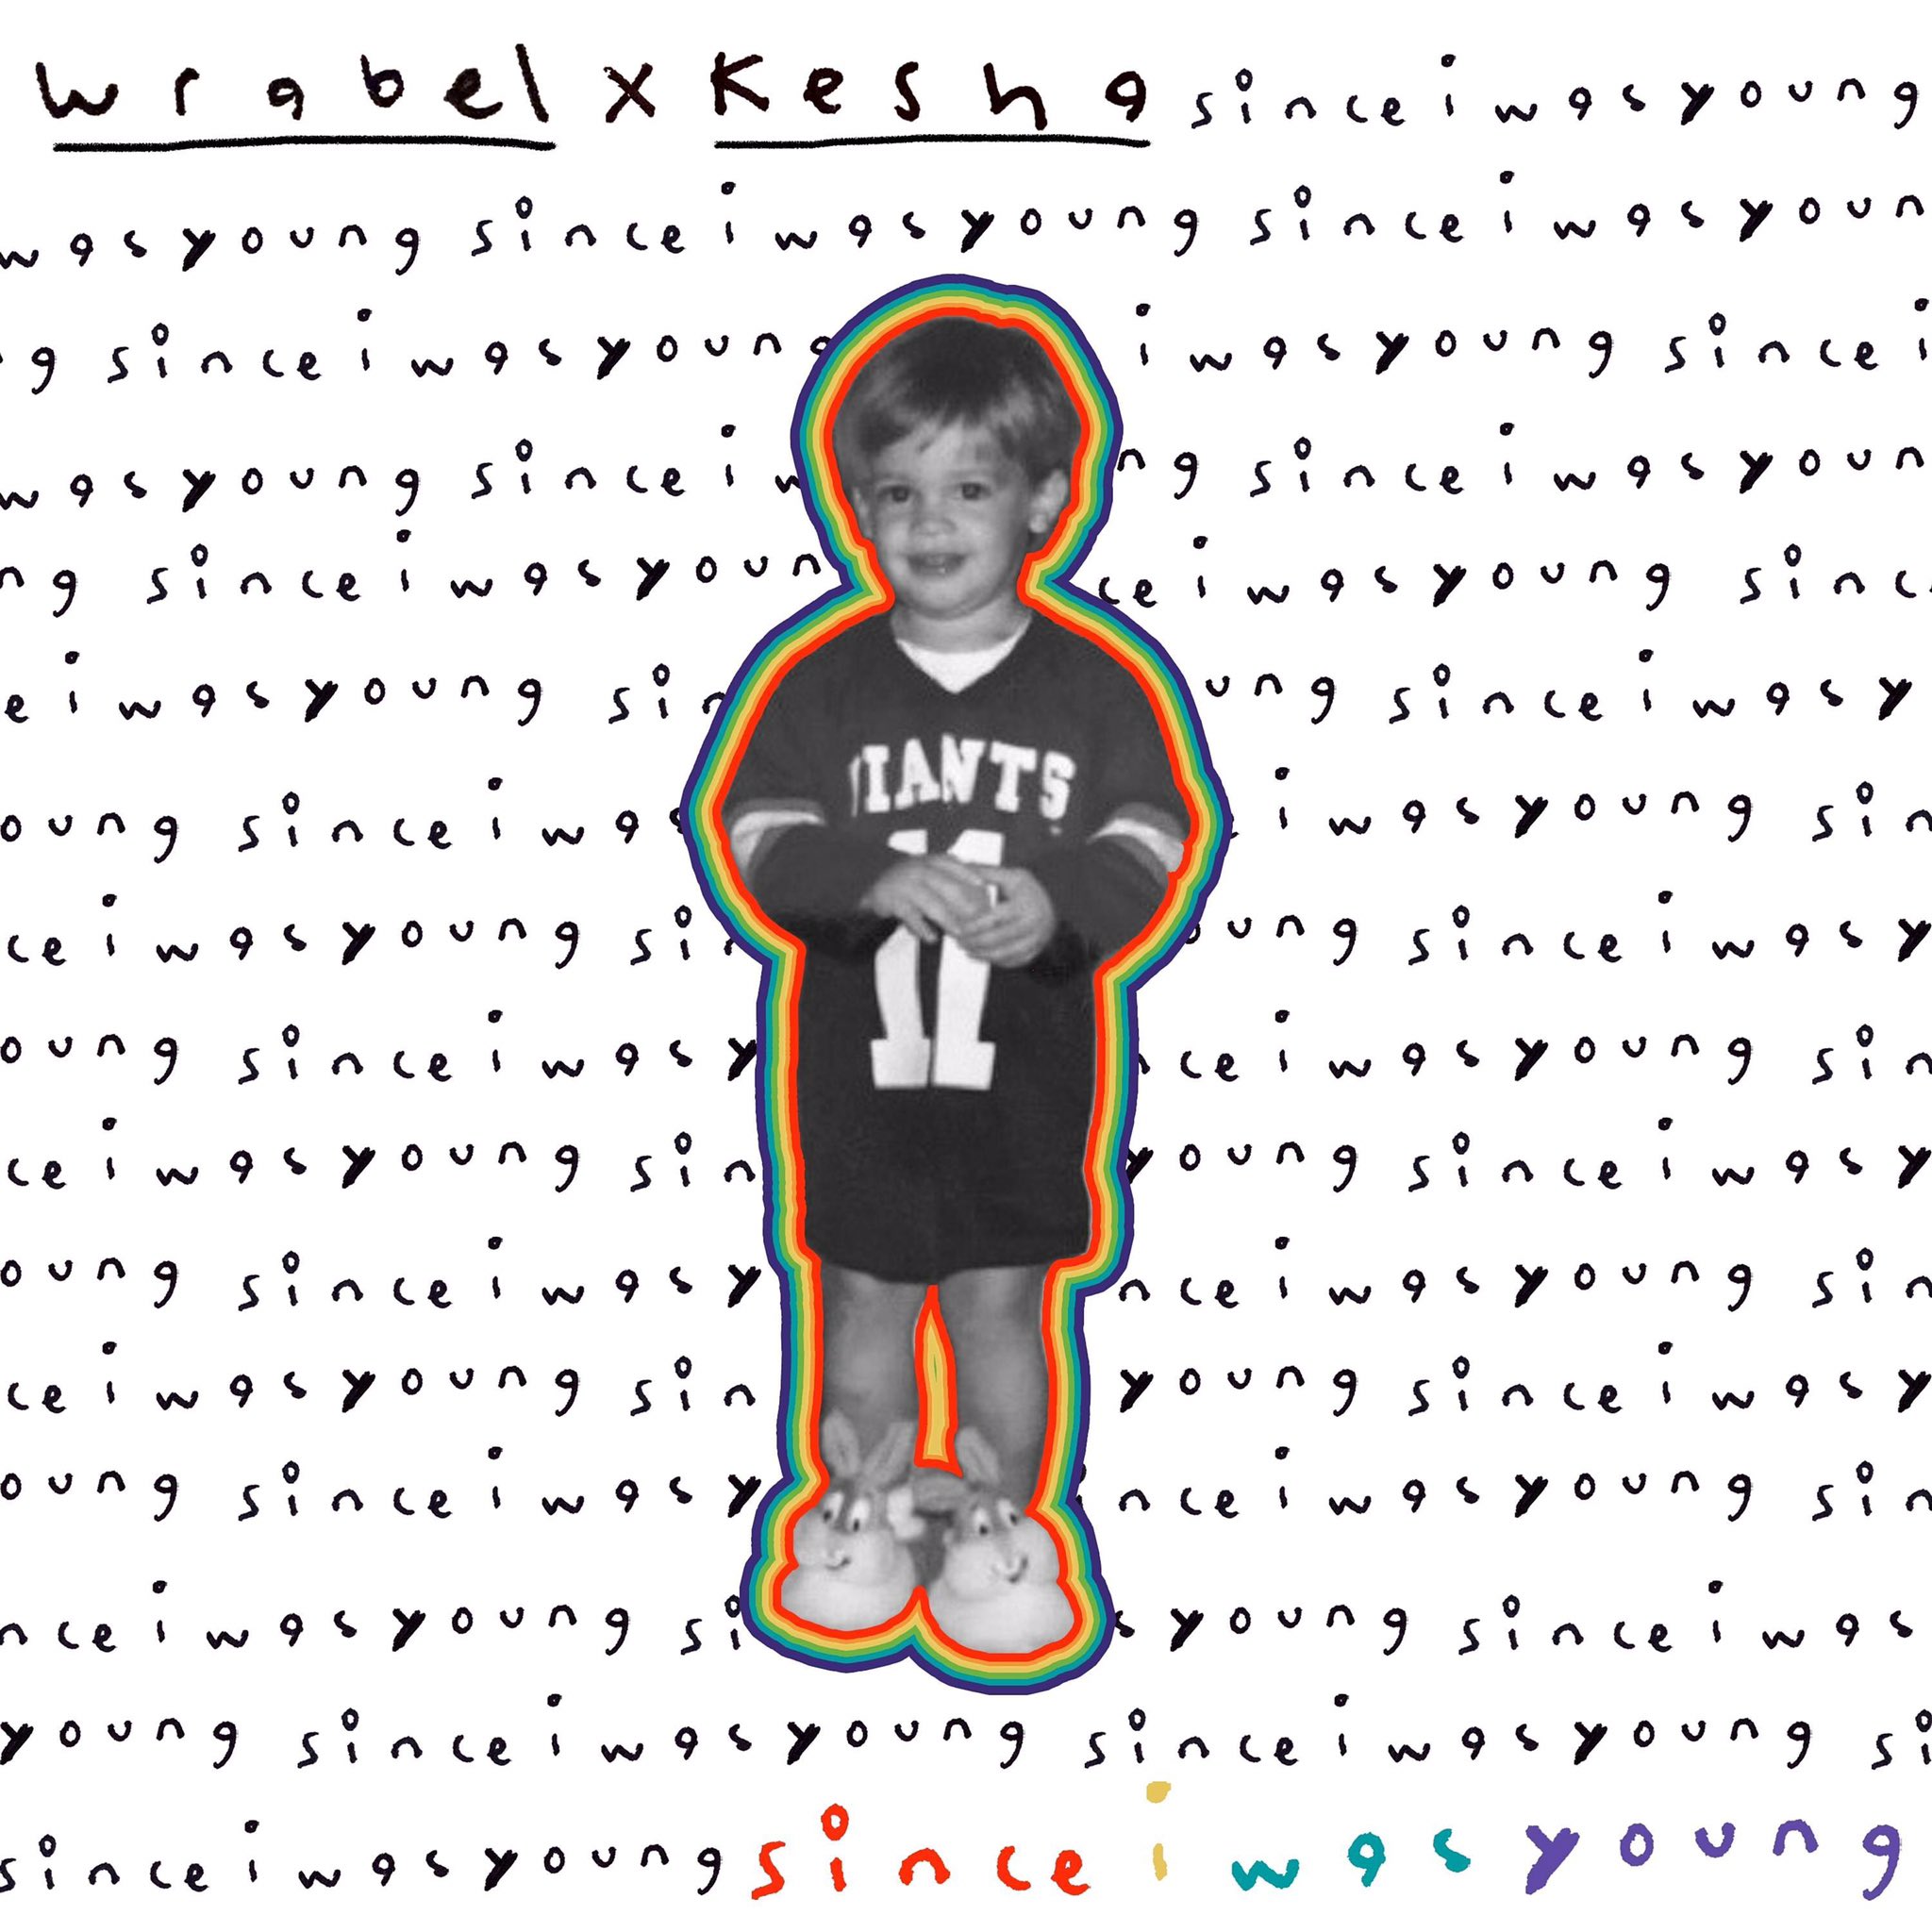 Wrabel & Kesha since i was young cover artwork